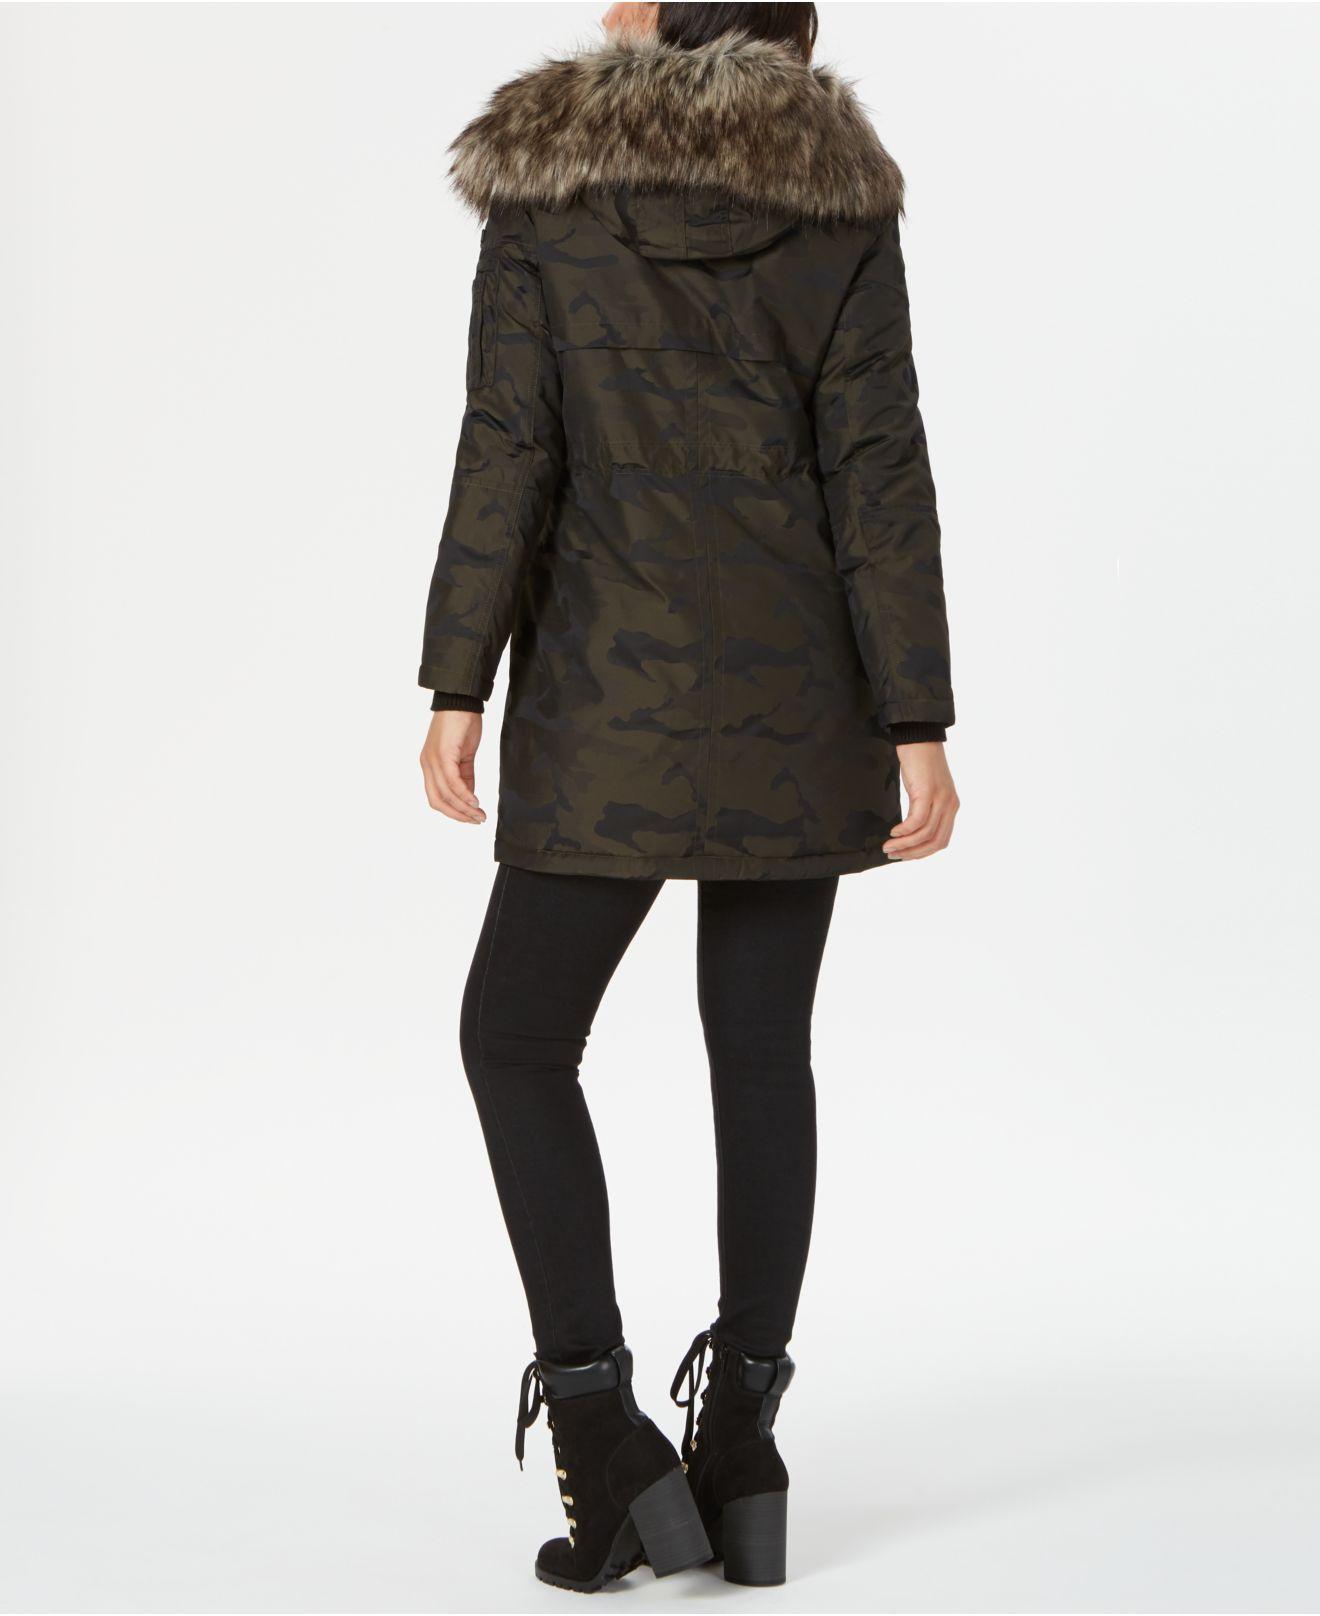 BCBGeneration Faux-fur Trim Hooded Anorak Puffer Coat in Army Camo ...